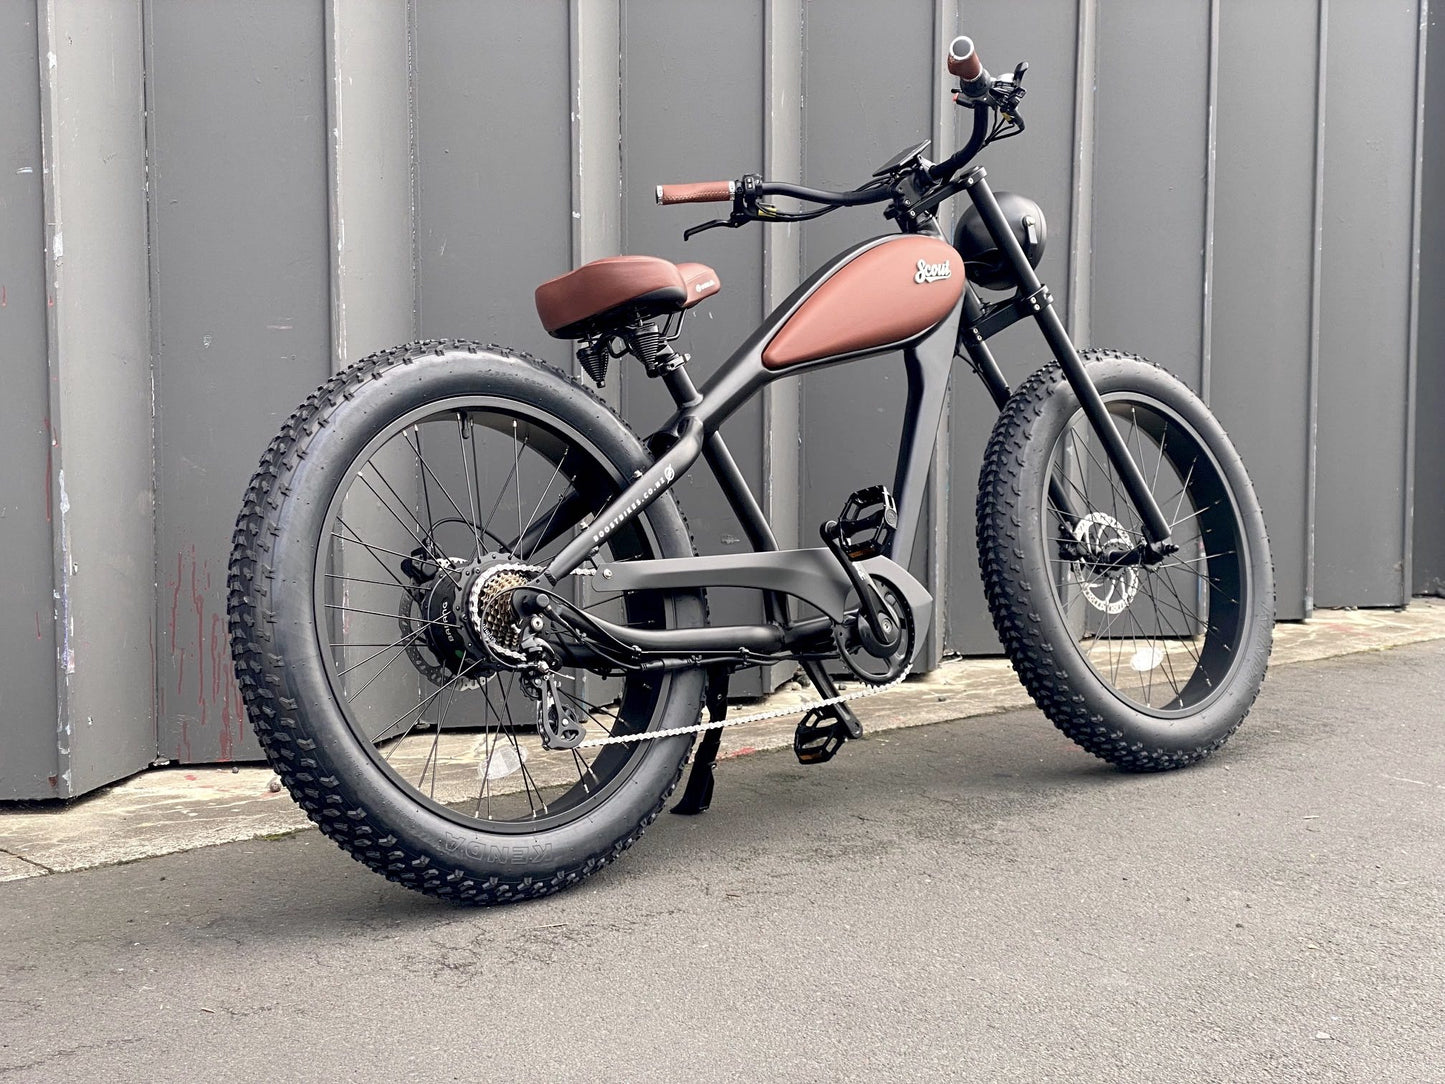 Scout Electric Motorbike by Boostbikes. Combining vintage motorcycle designs of the past, with the modern technology of today. Custom crafted and built with high quality parts from Shimano, Samsung, Tektro and Bafang.